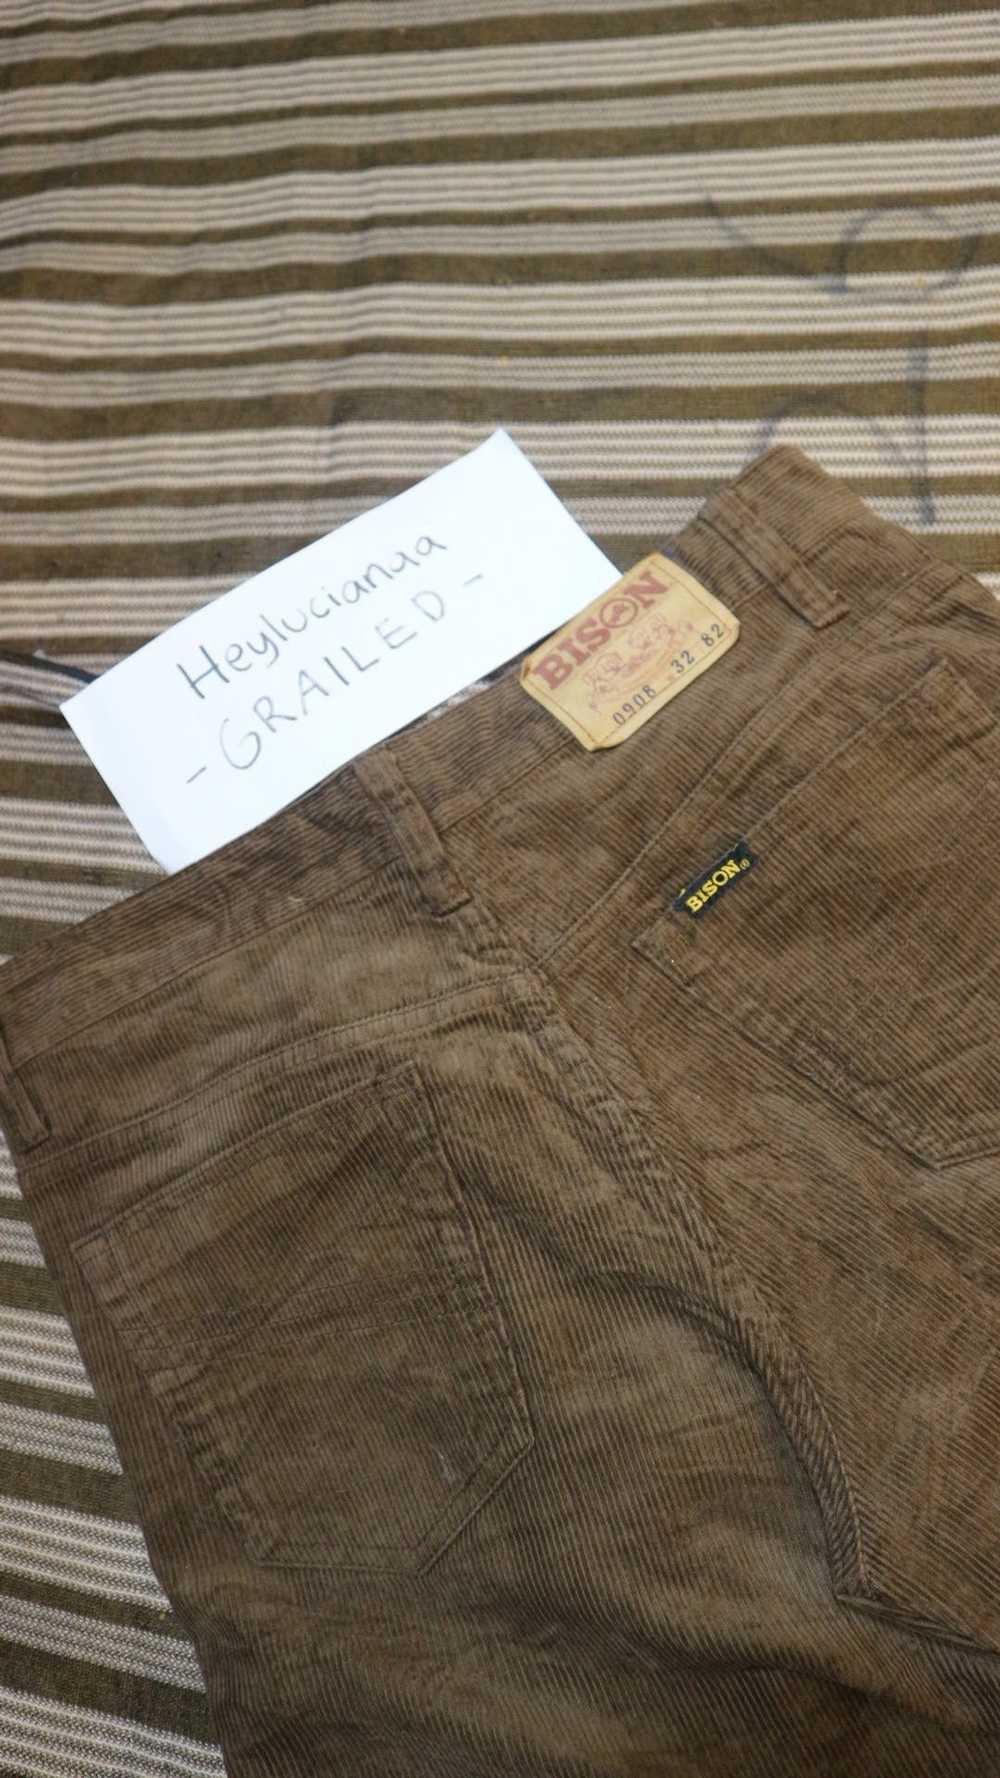 Japanese Brand Corduroy Pant by Bison - image 7